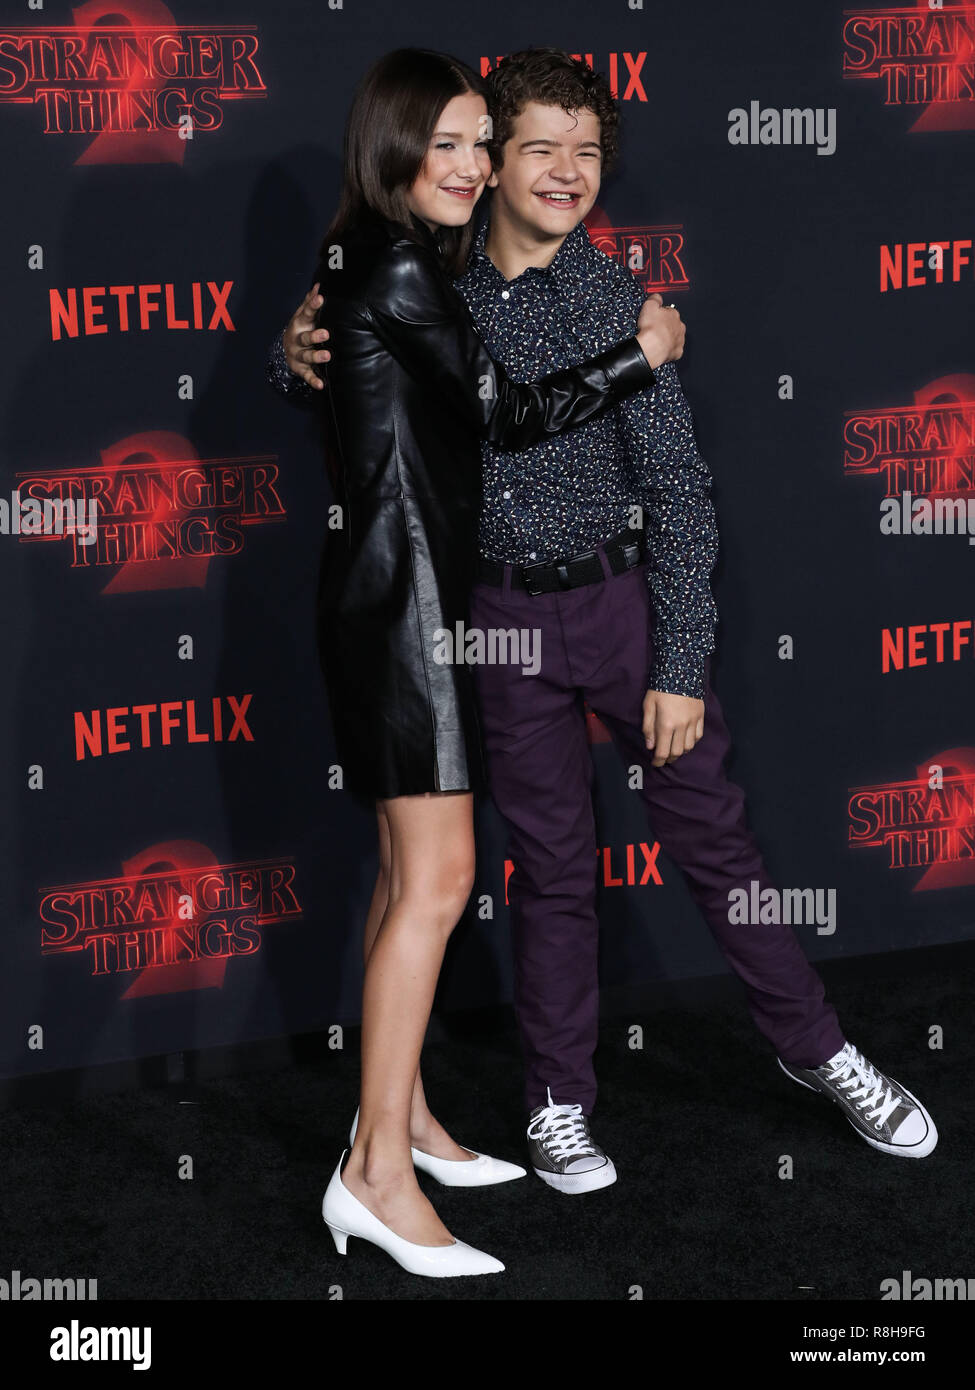 WESTWOOD, LOS ANGELES, CA, USA - OCTOBER 26: Actress Millie Bobby Brown  wearing a Calvin Klein dress arrives at the Los Angeles Premiere Of  Netflix's 'Stranger Things' Season 2 held at the